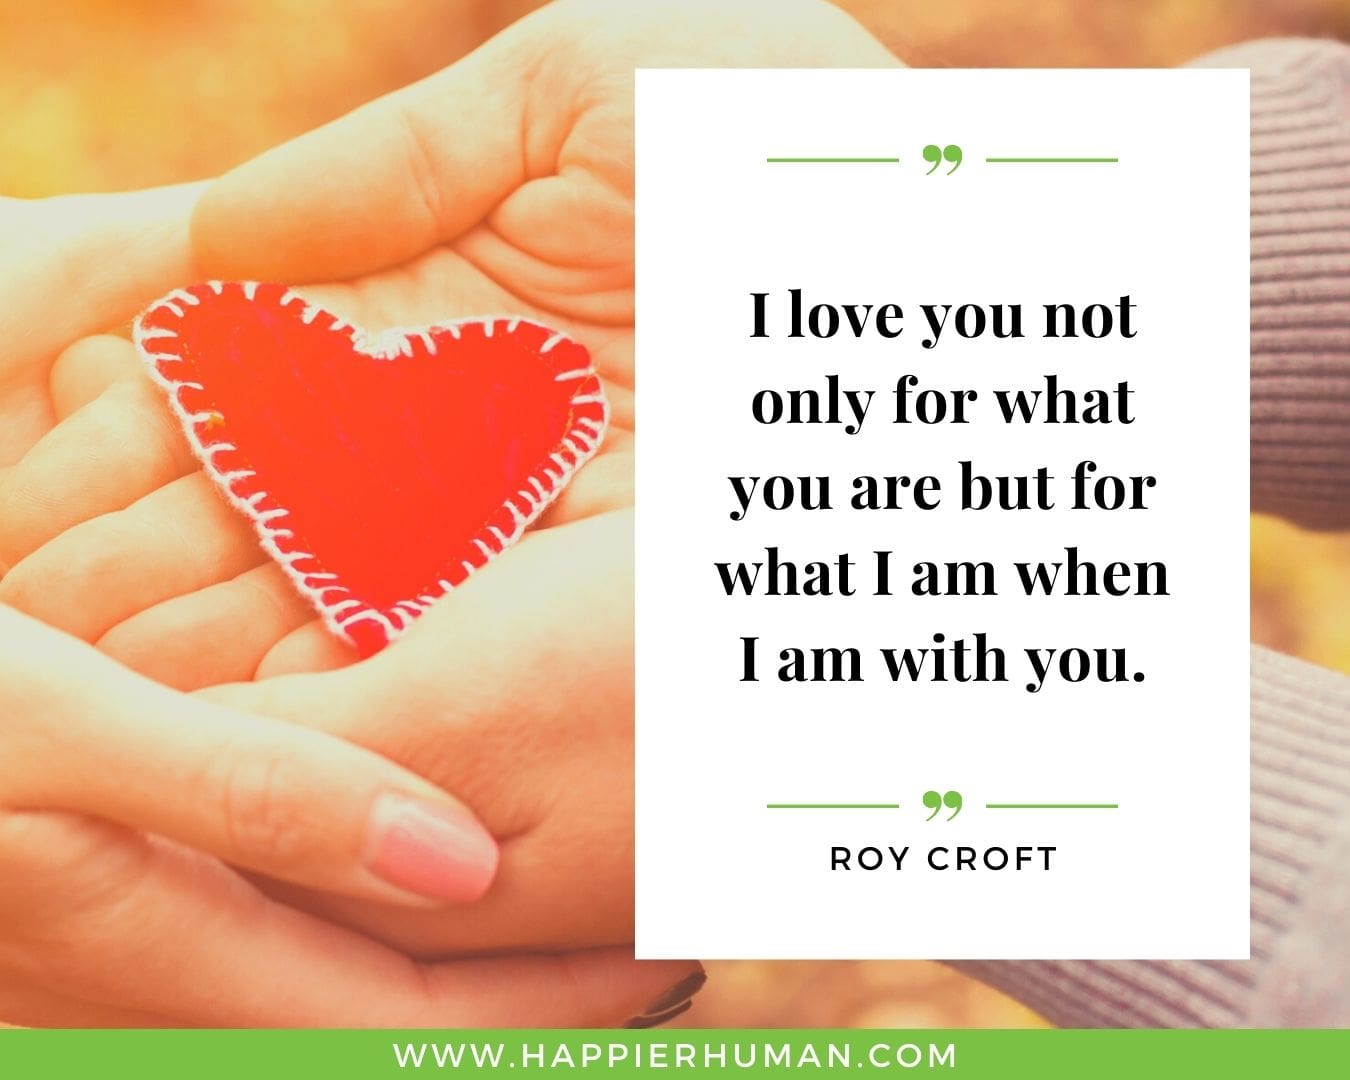 loving you quotes